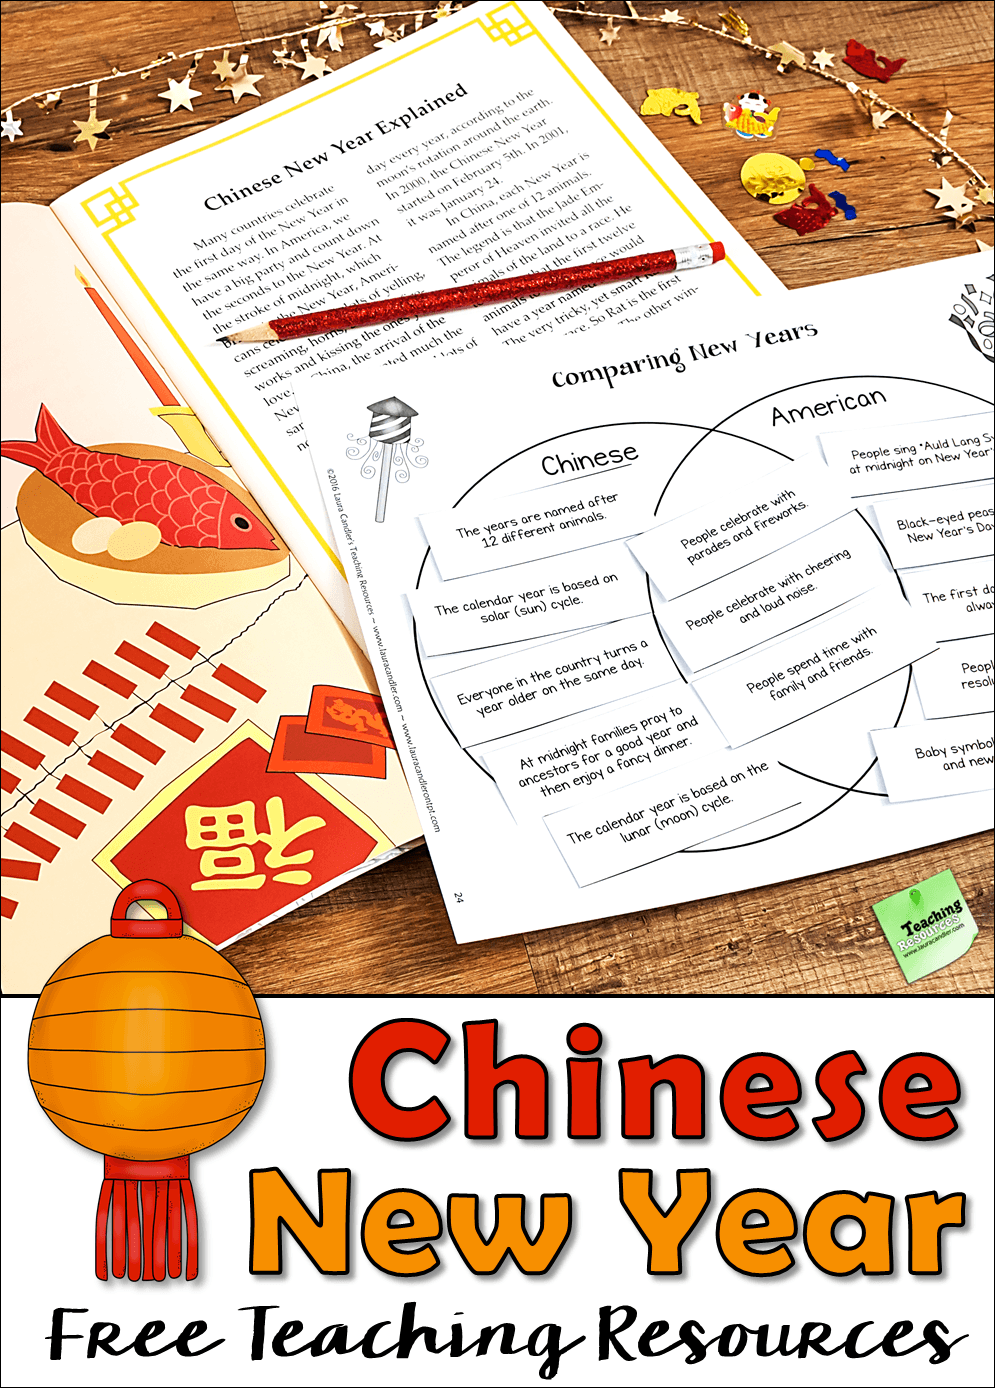 Free Chinese New Year Teaching Resources